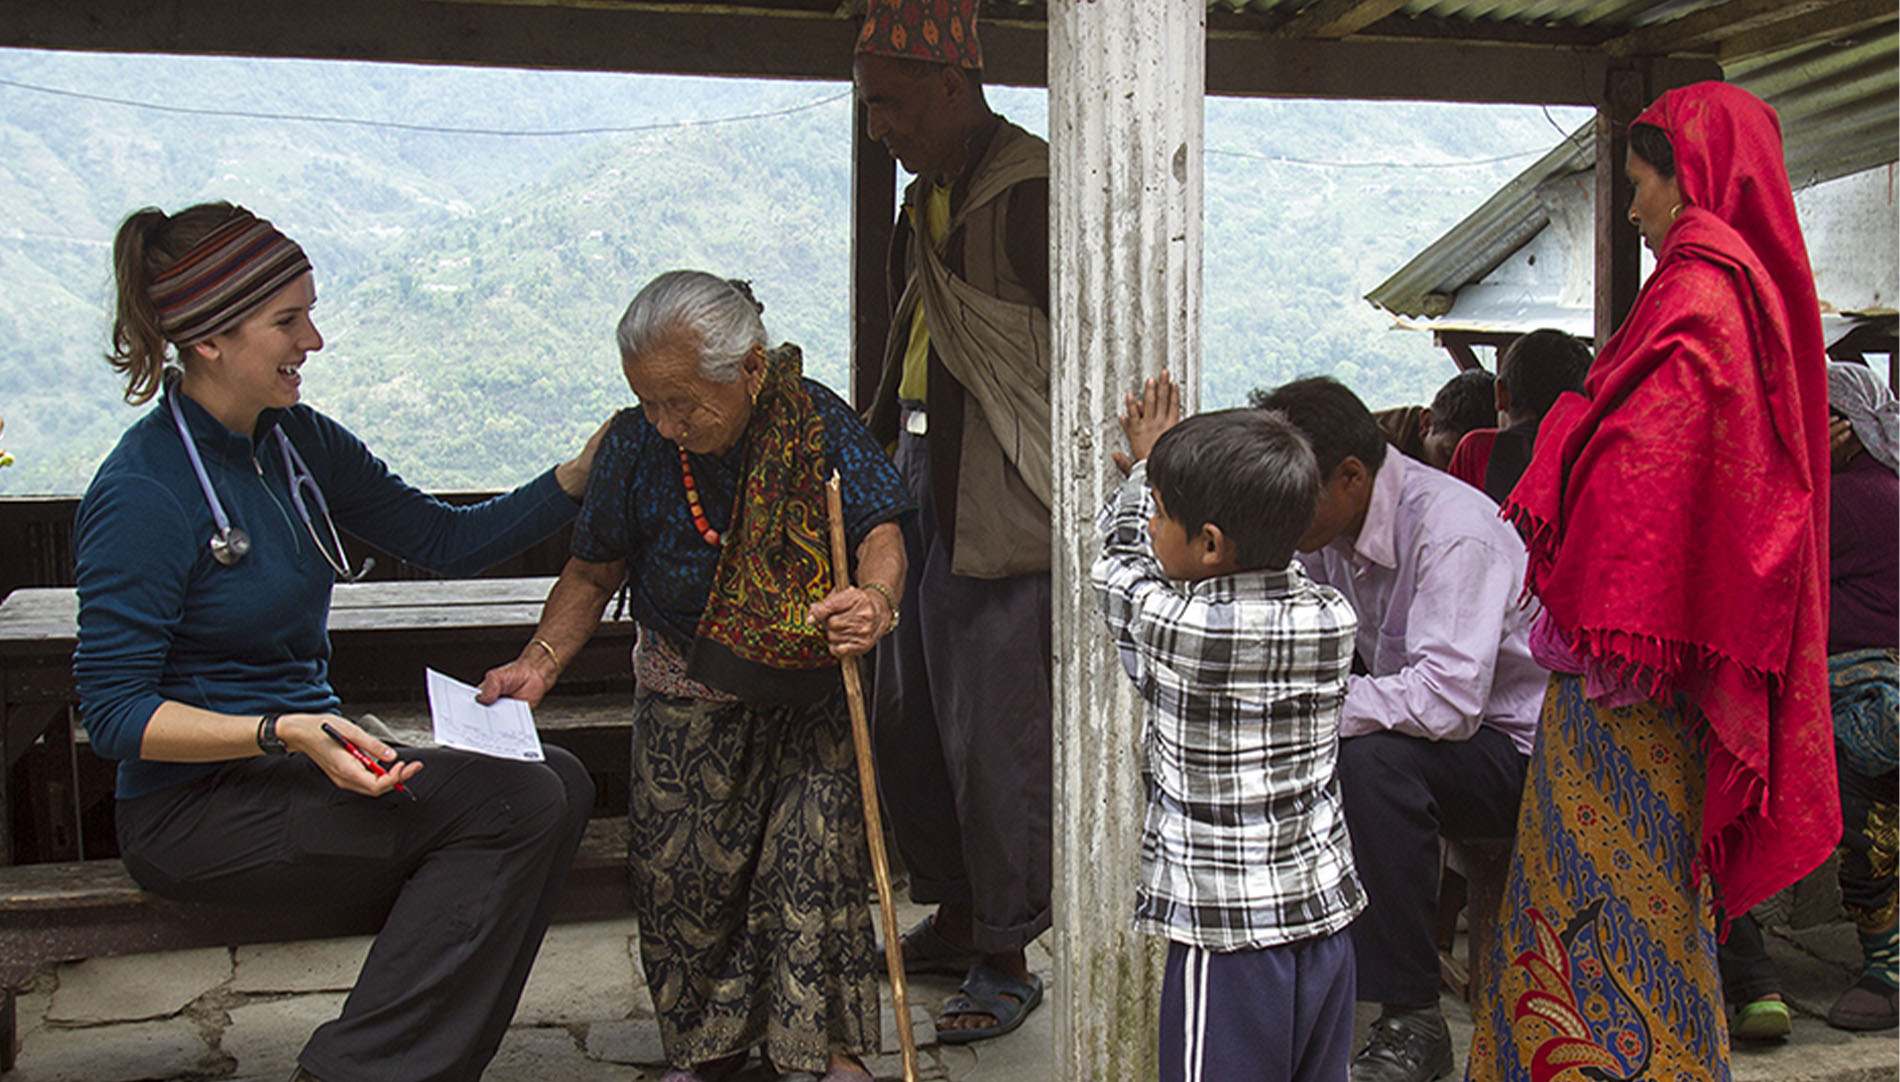 PA students with patients in Kimchee Health Camp, Ghandruk, Nepal